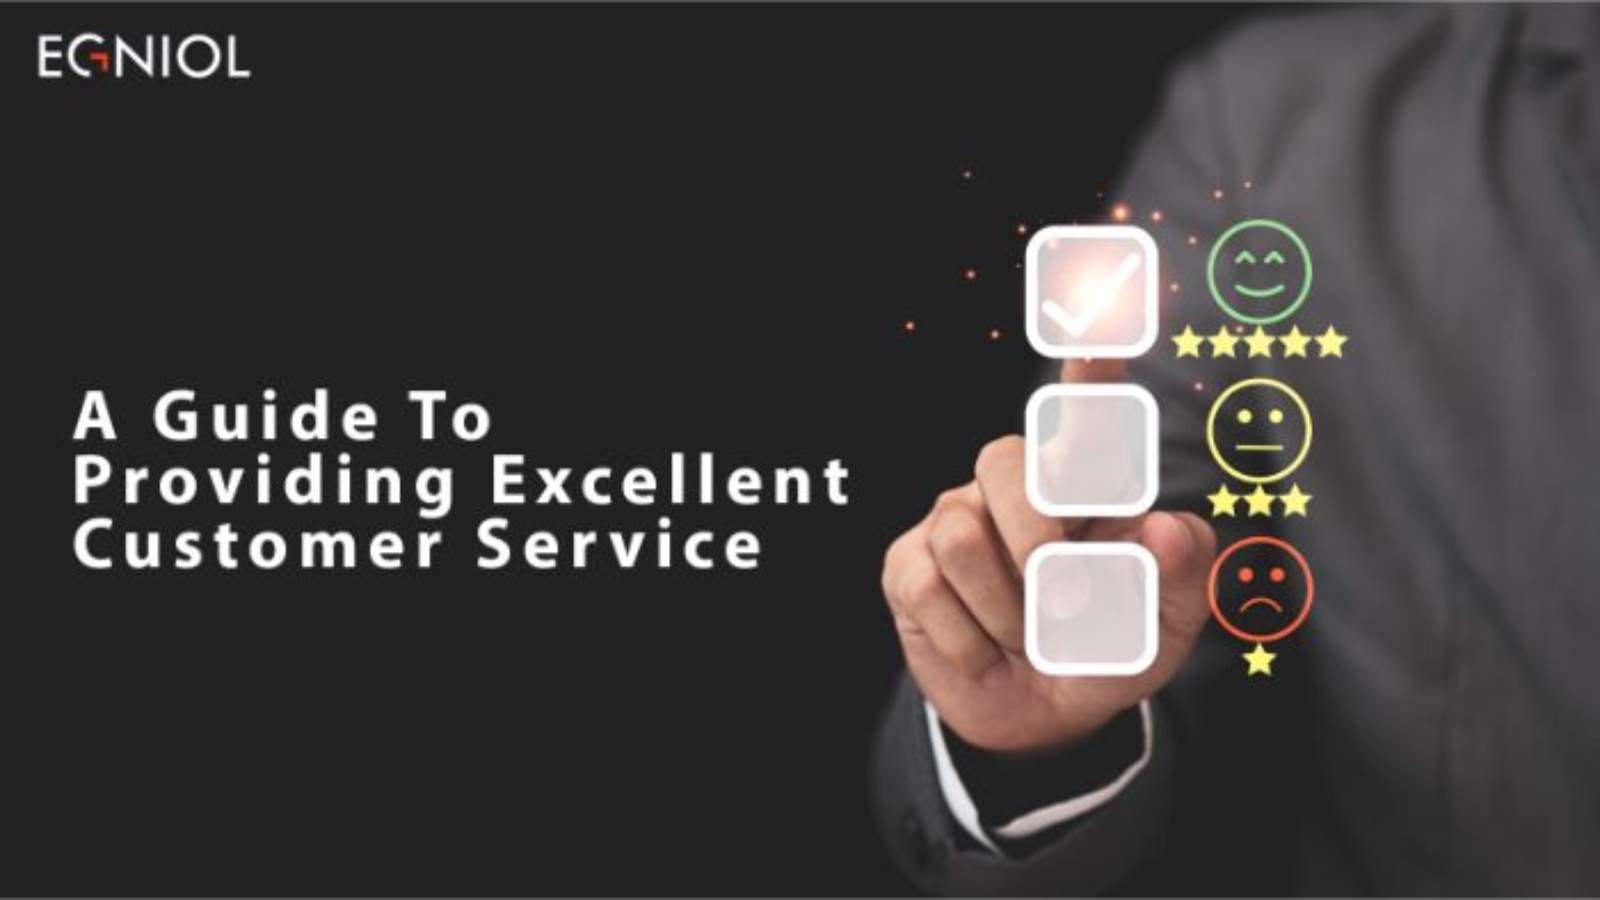 A Guide To Providing Excellent Customer Service - By Egniol